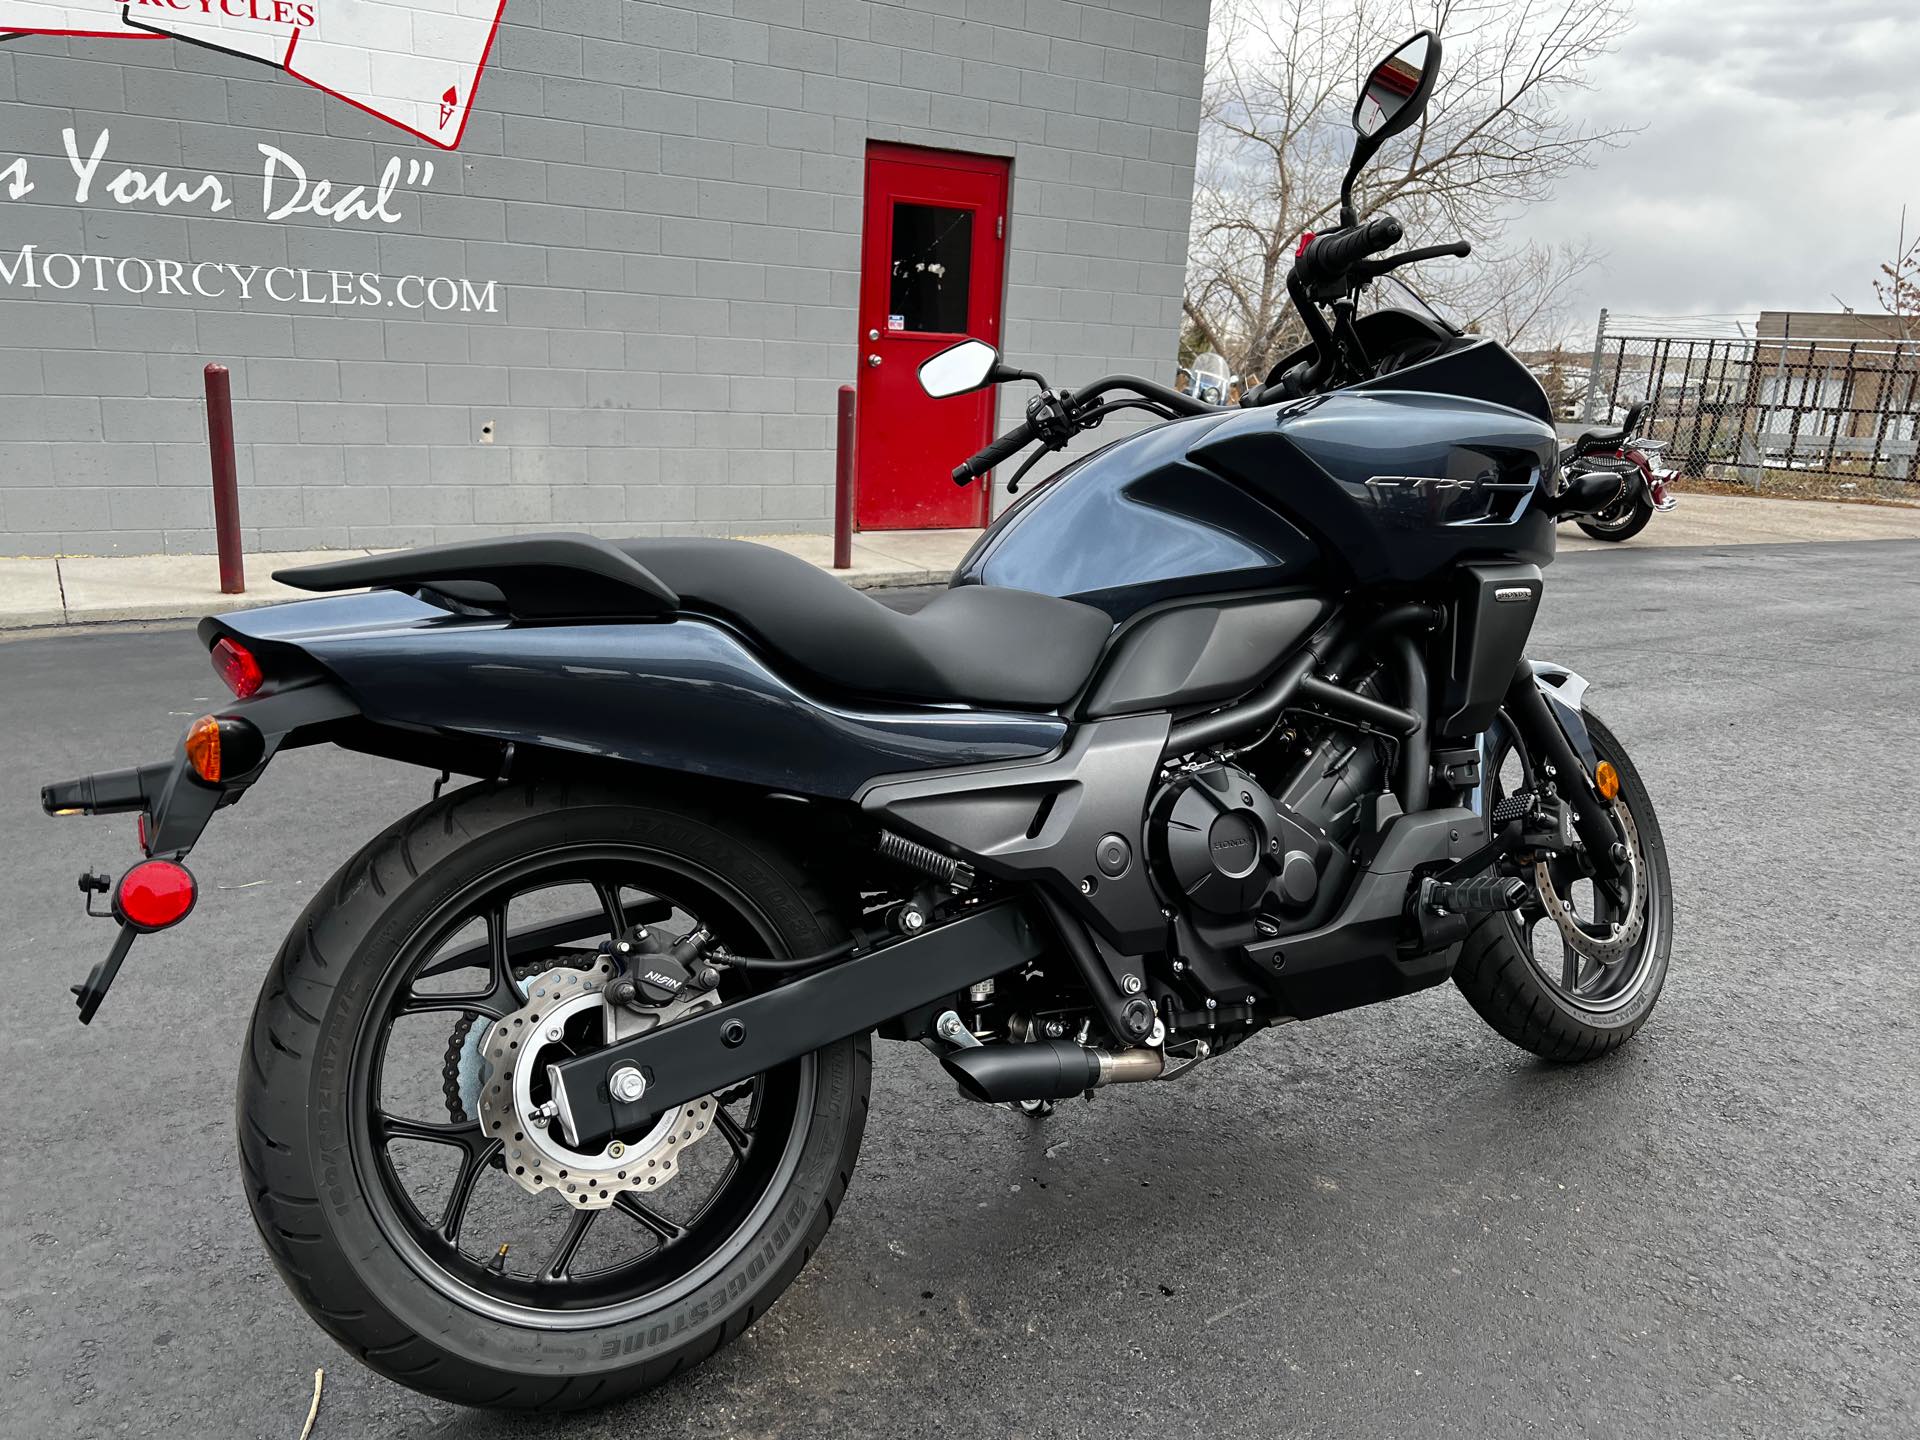 2015 Honda CTX 700 at Aces Motorcycles - Fort Collins